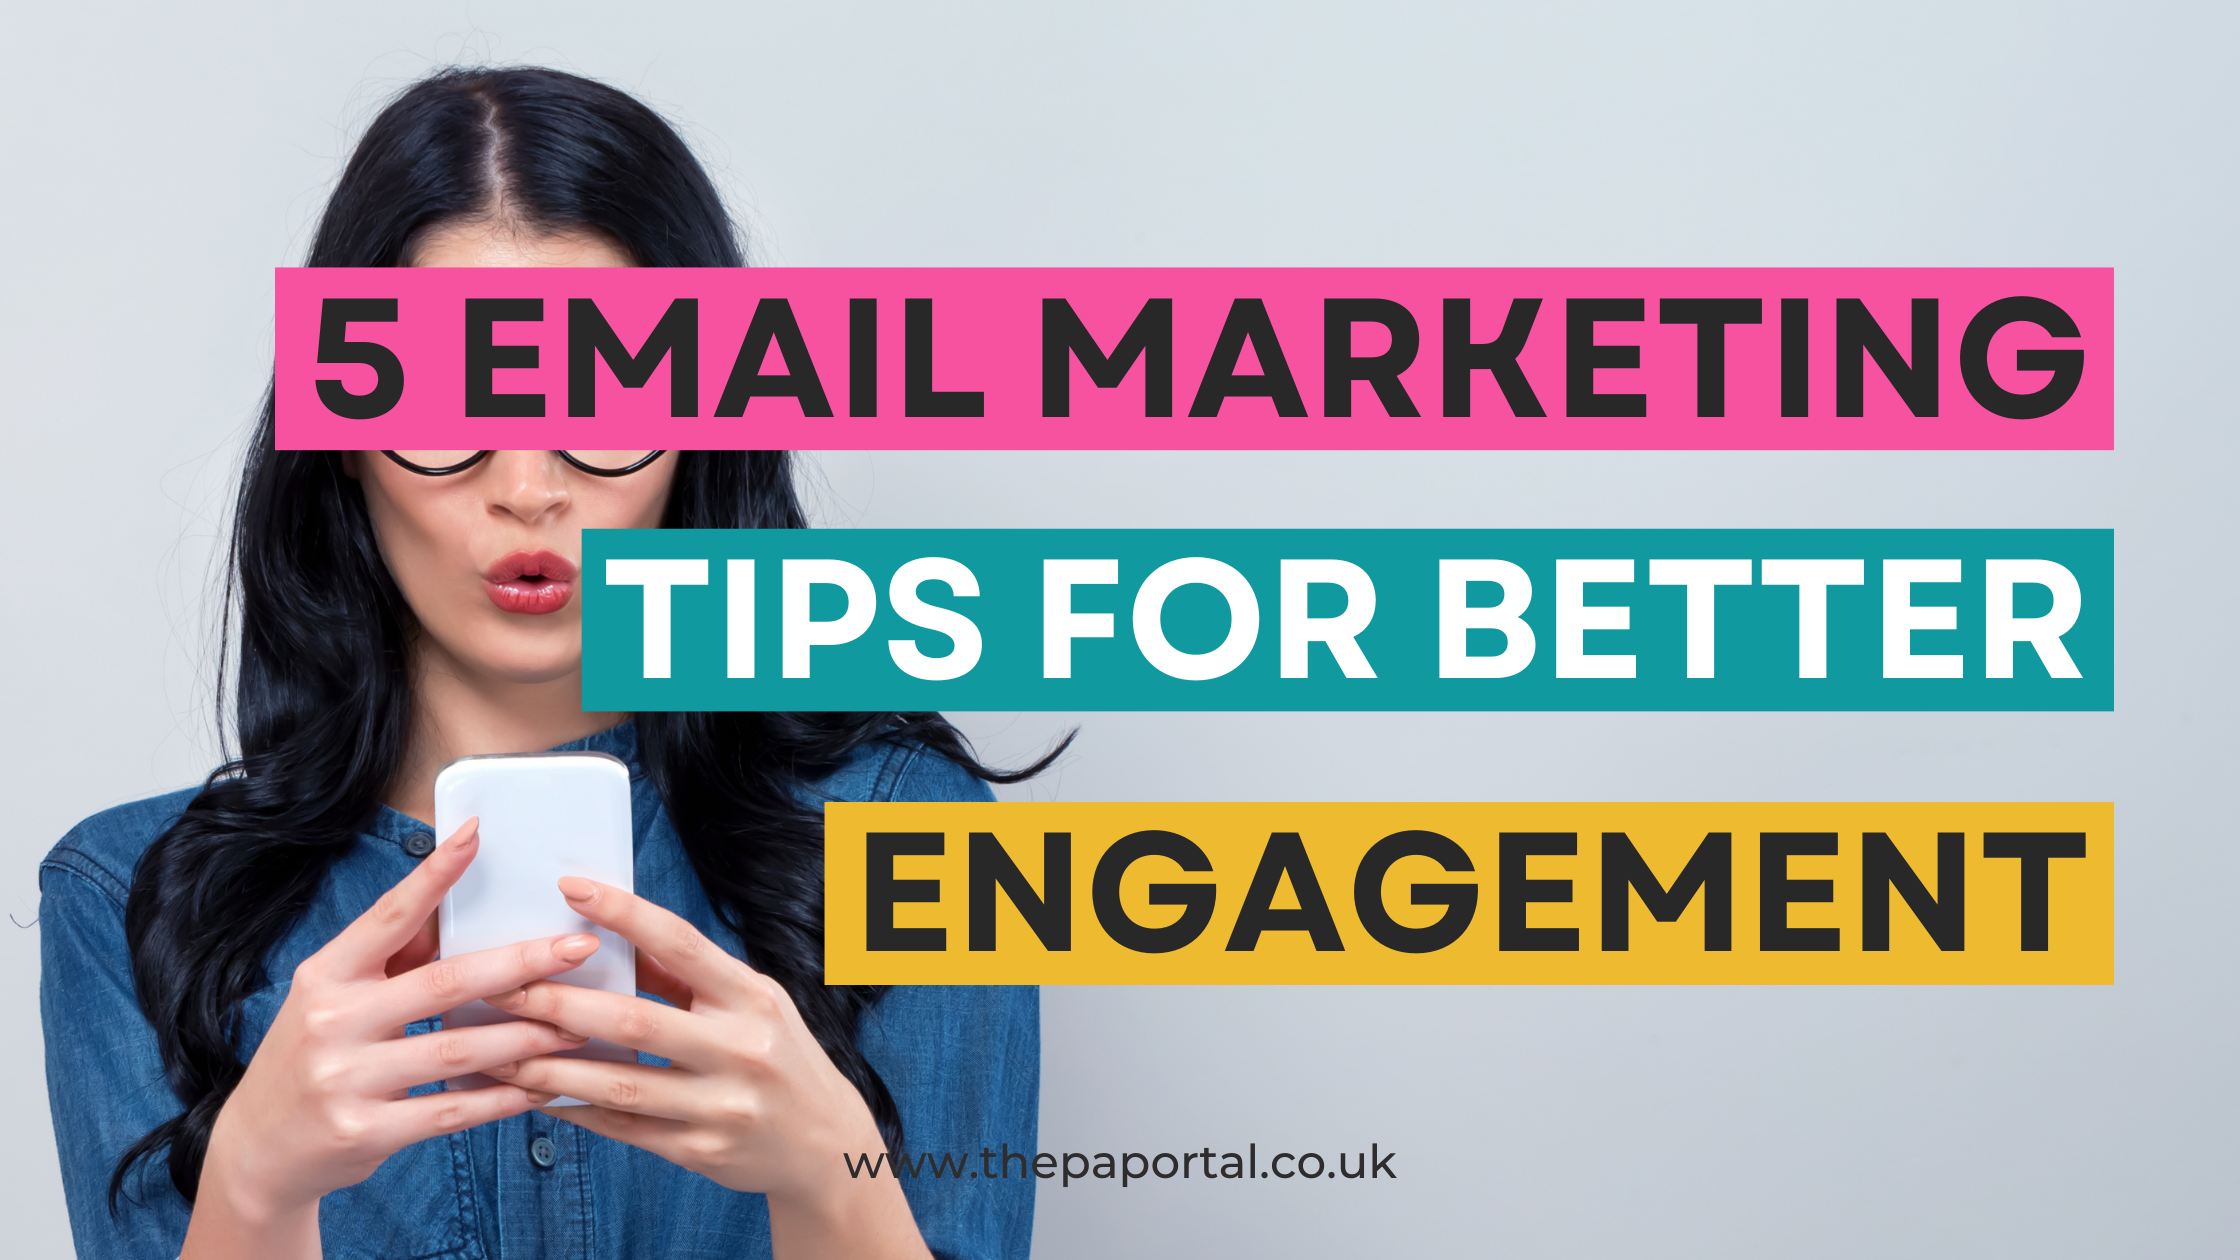 Women reacting positively to something she reads on her mobile phone with text overlayed saying 5 email marketing tips for better engagement